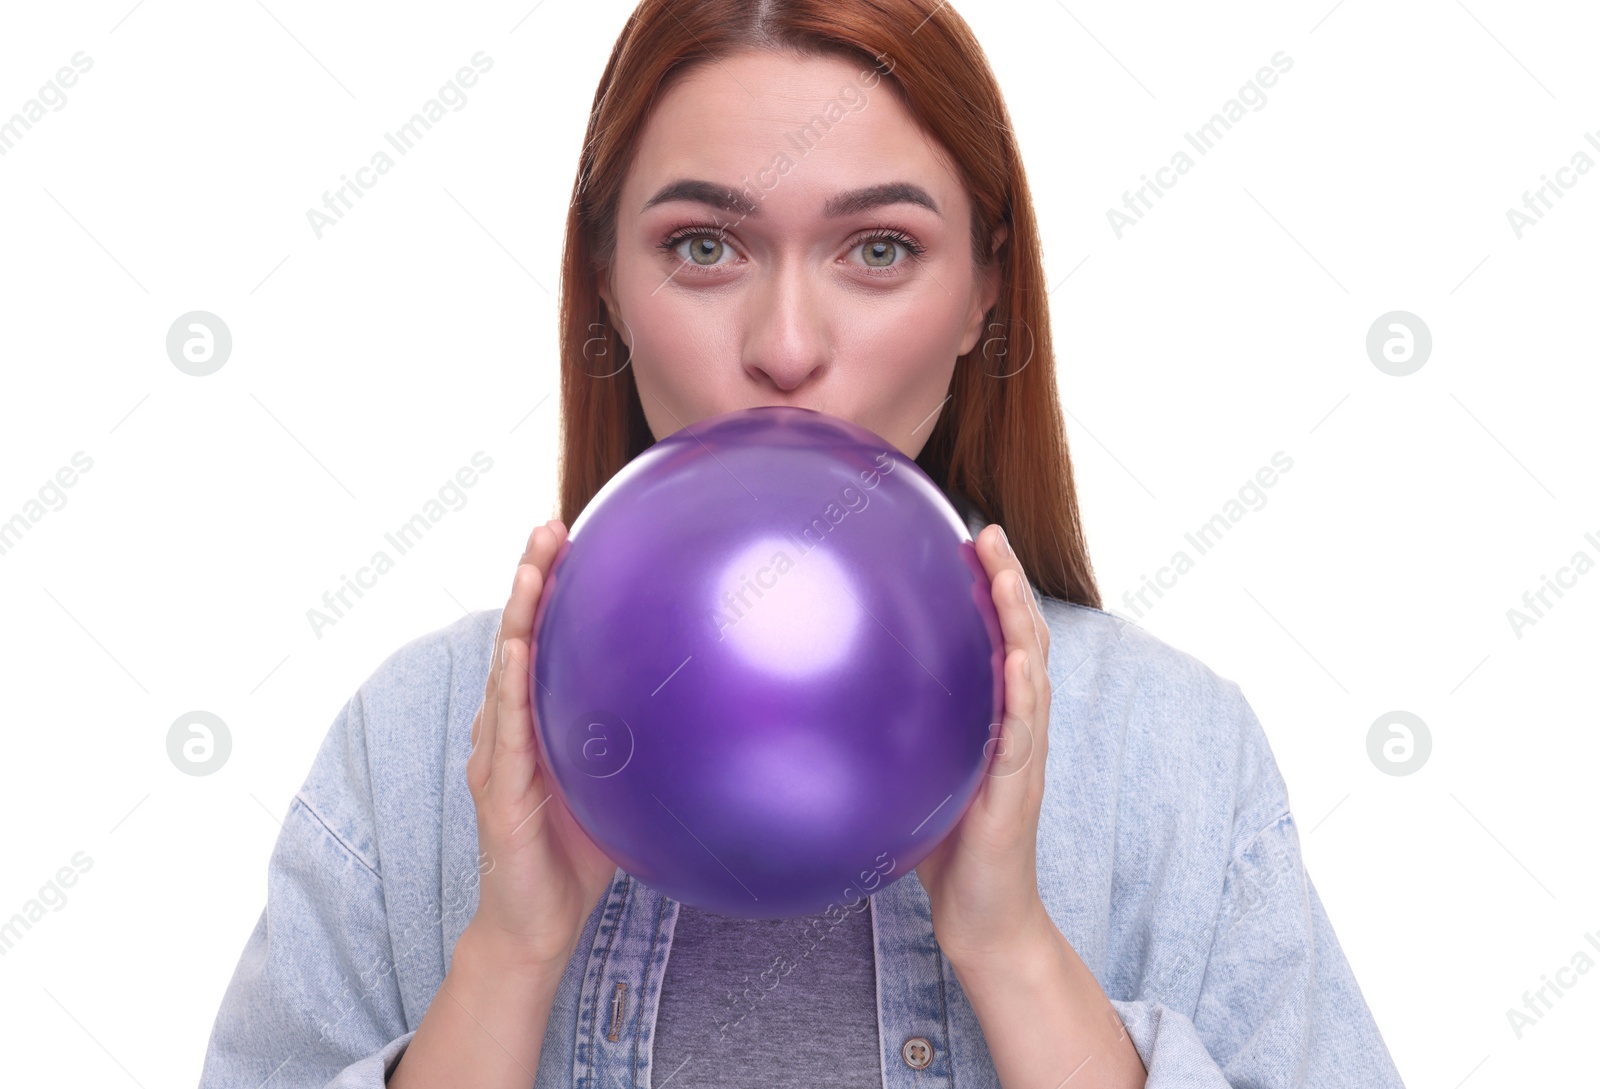 Photo of Woman inflating purple balloon on white background